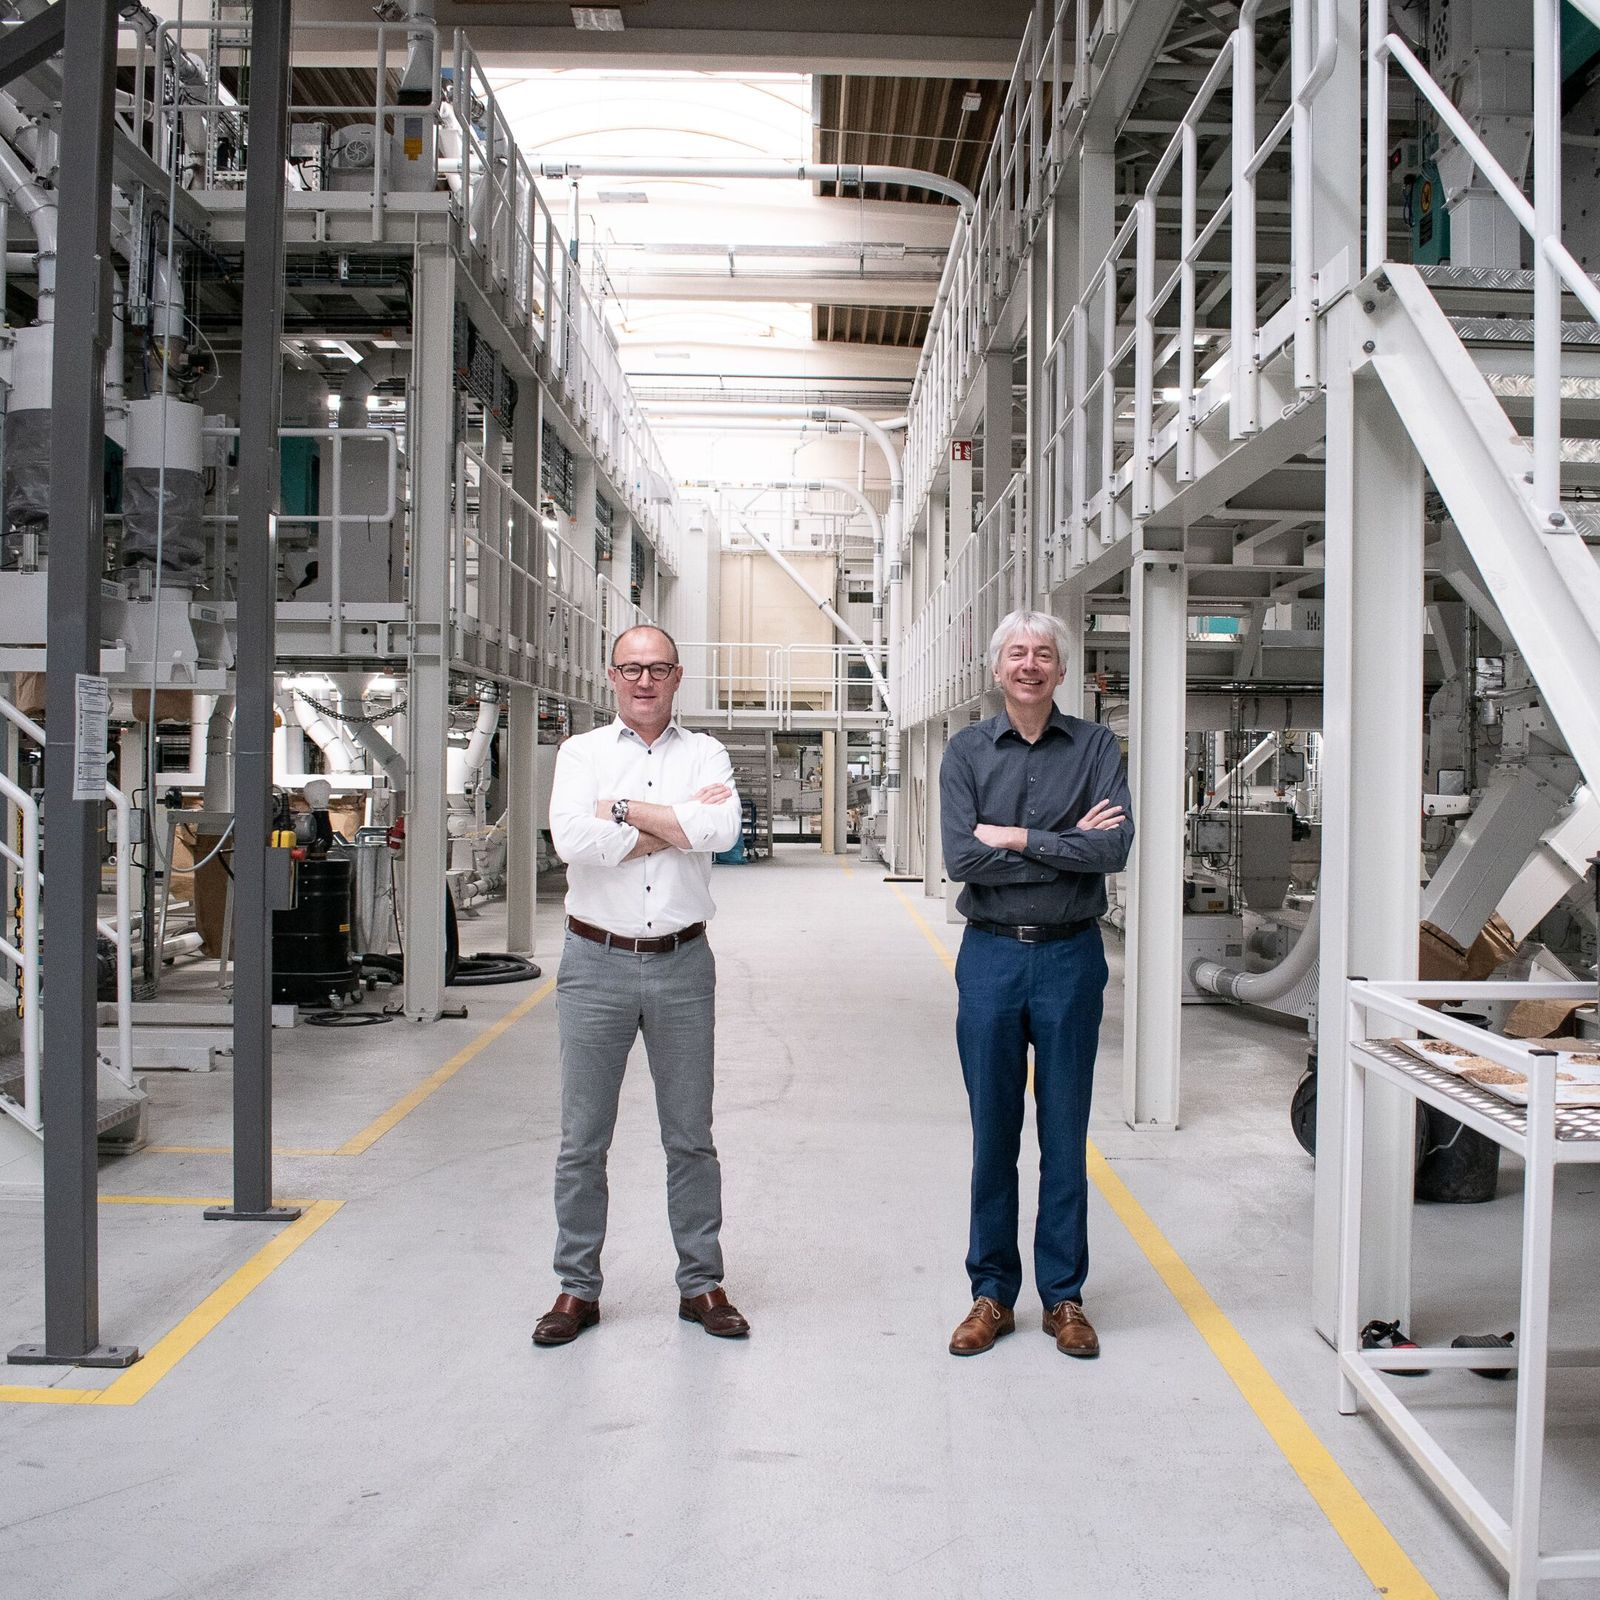 Peter Vyncke and Johannes Wick announced a strategic partnership between Vyncke and Bühler in March 2021.